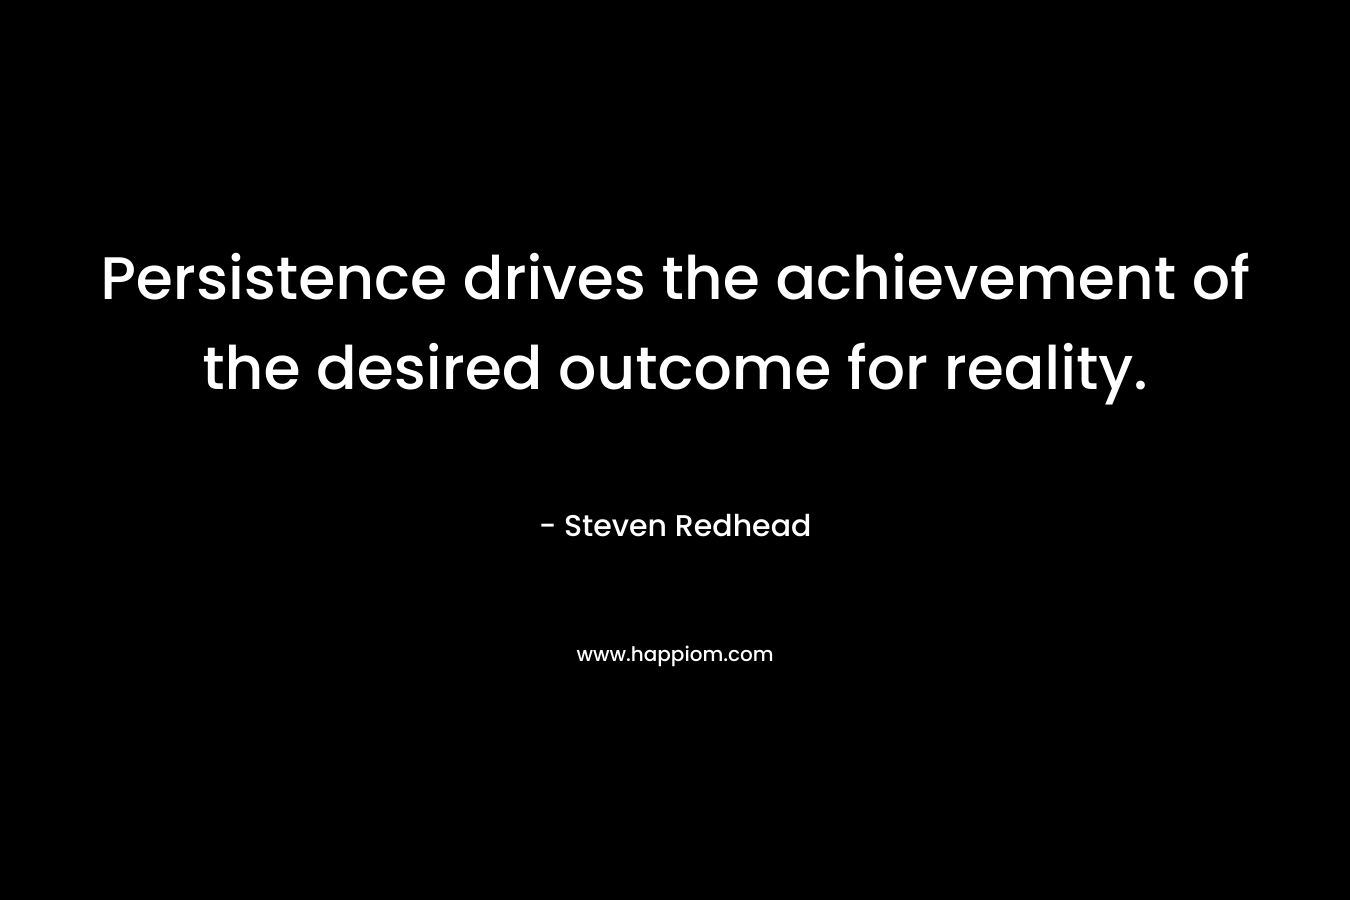 Persistence drives the achievement of the desired outcome for reality.